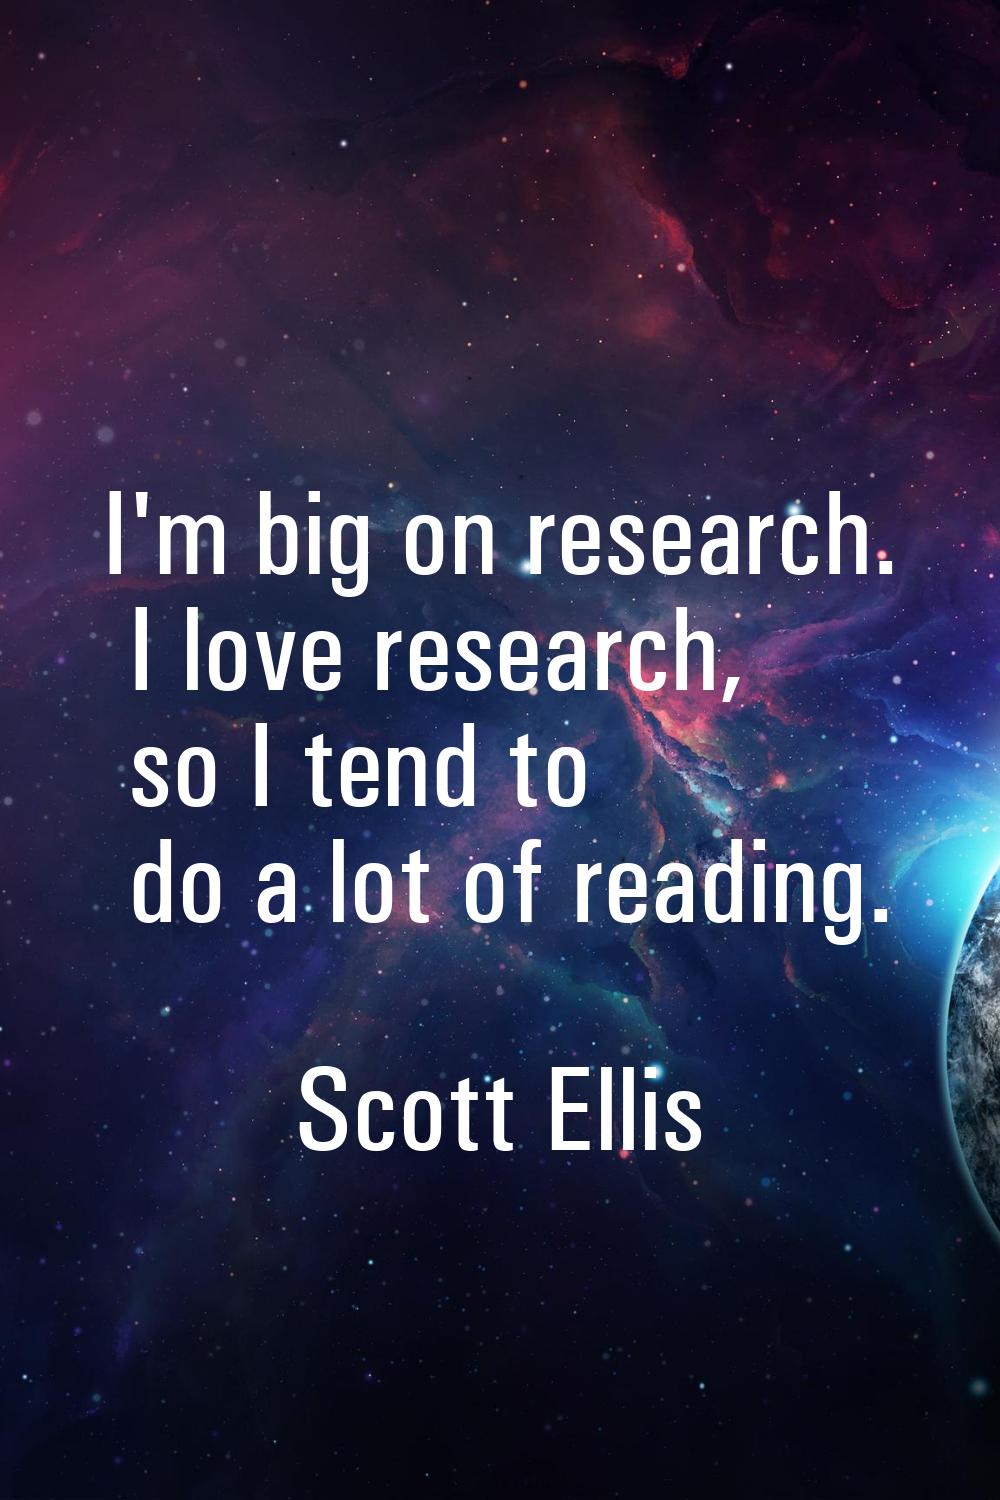 I'm big on research. I love research, so I tend to do a lot of reading.